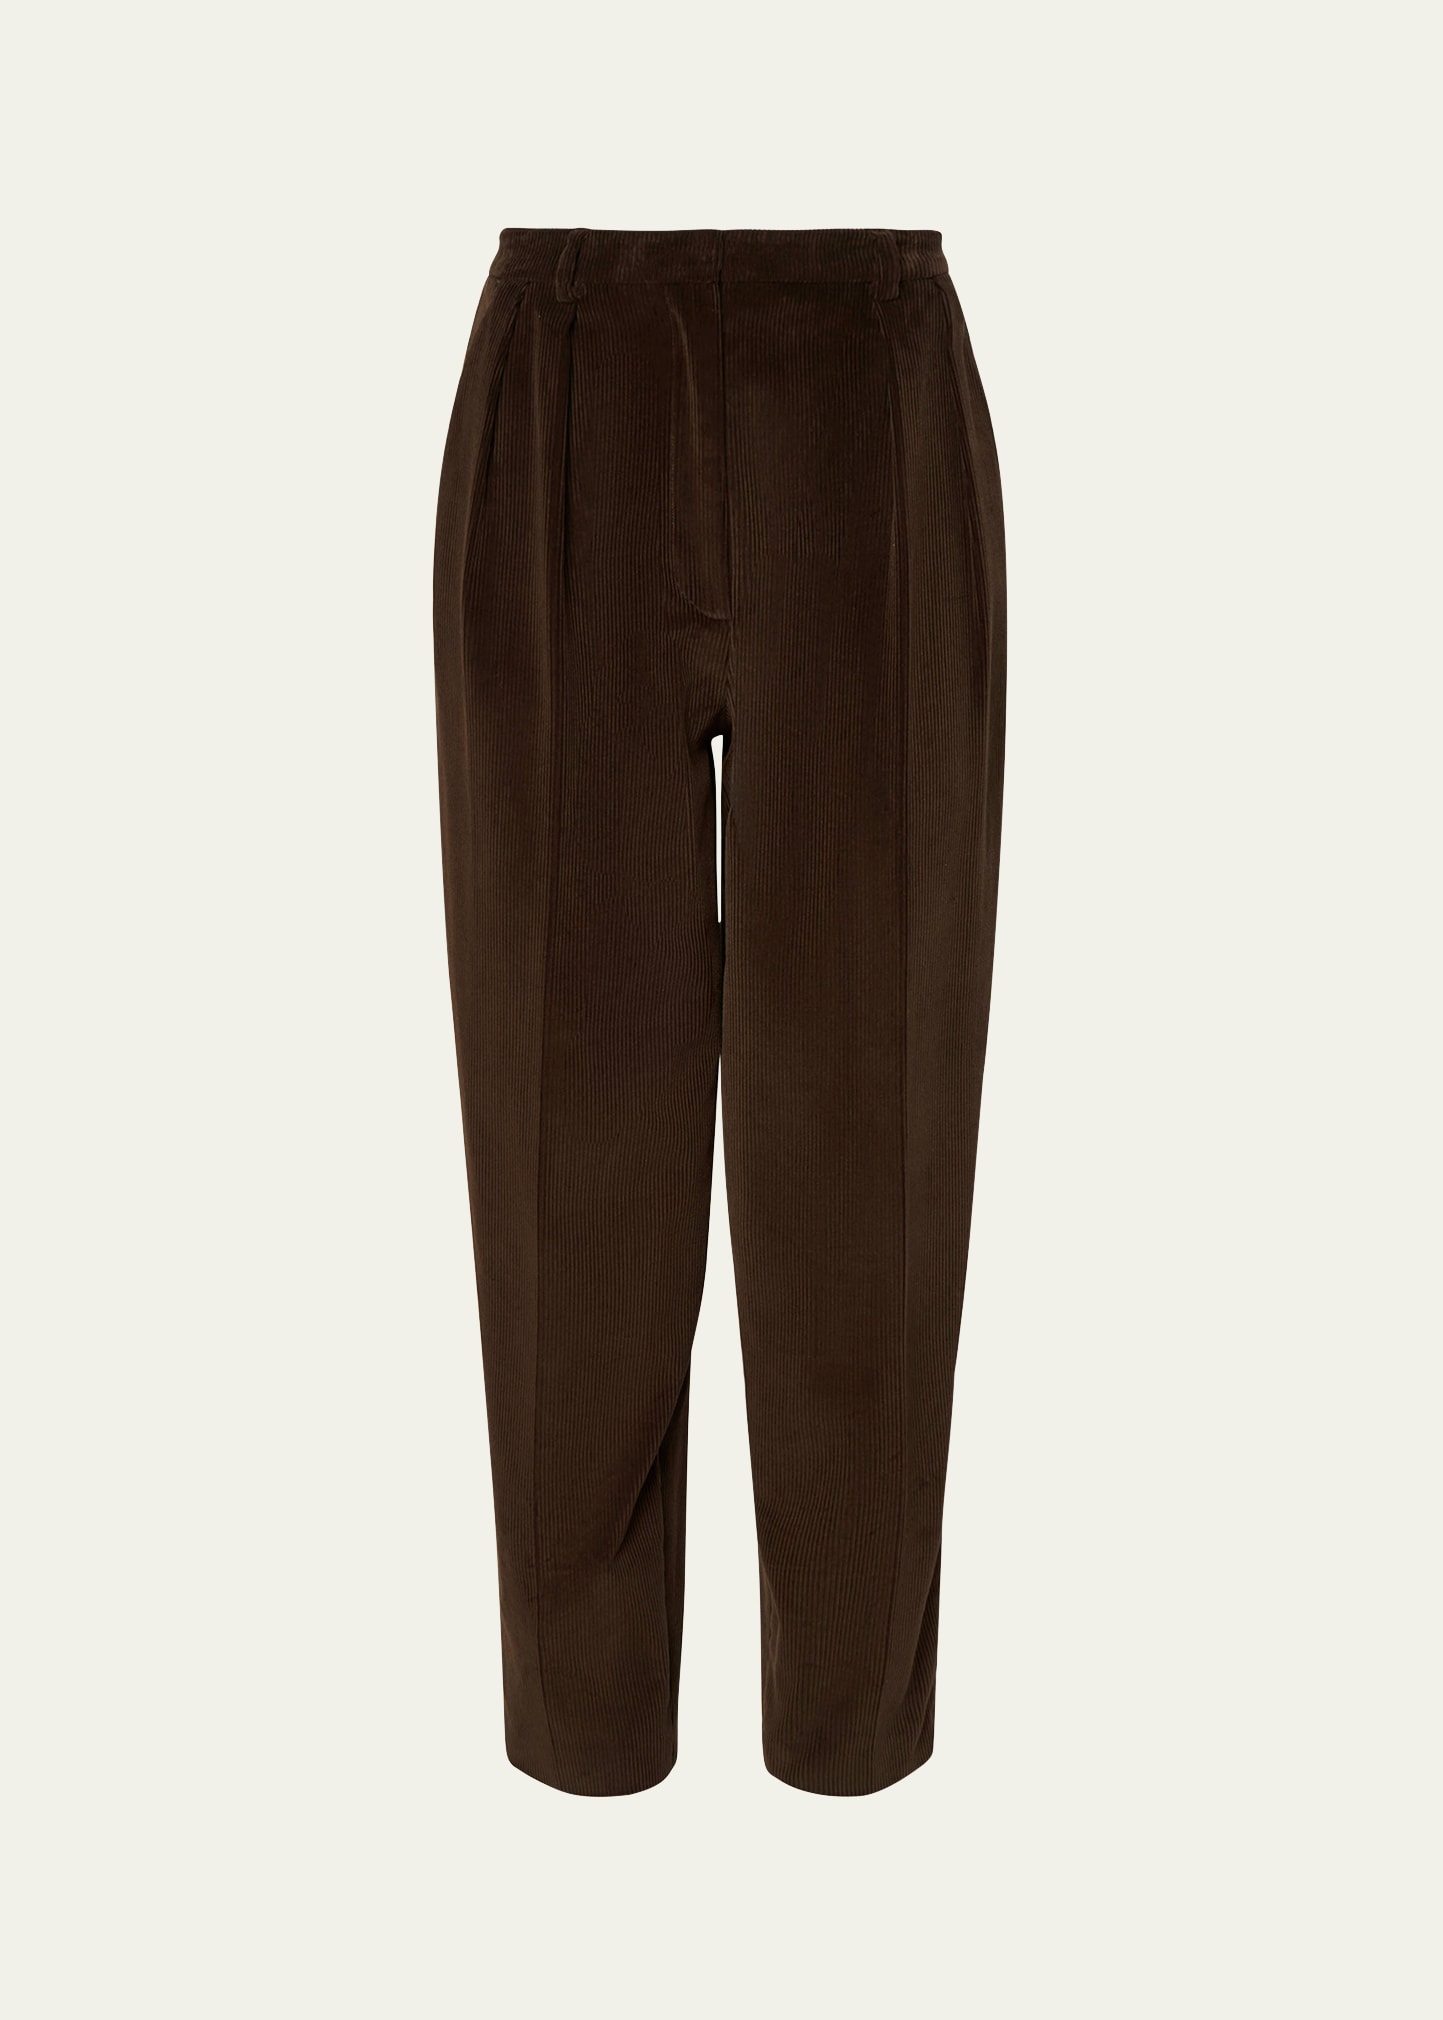 Emmett Corduroy Double-Pleated Tapered Pants